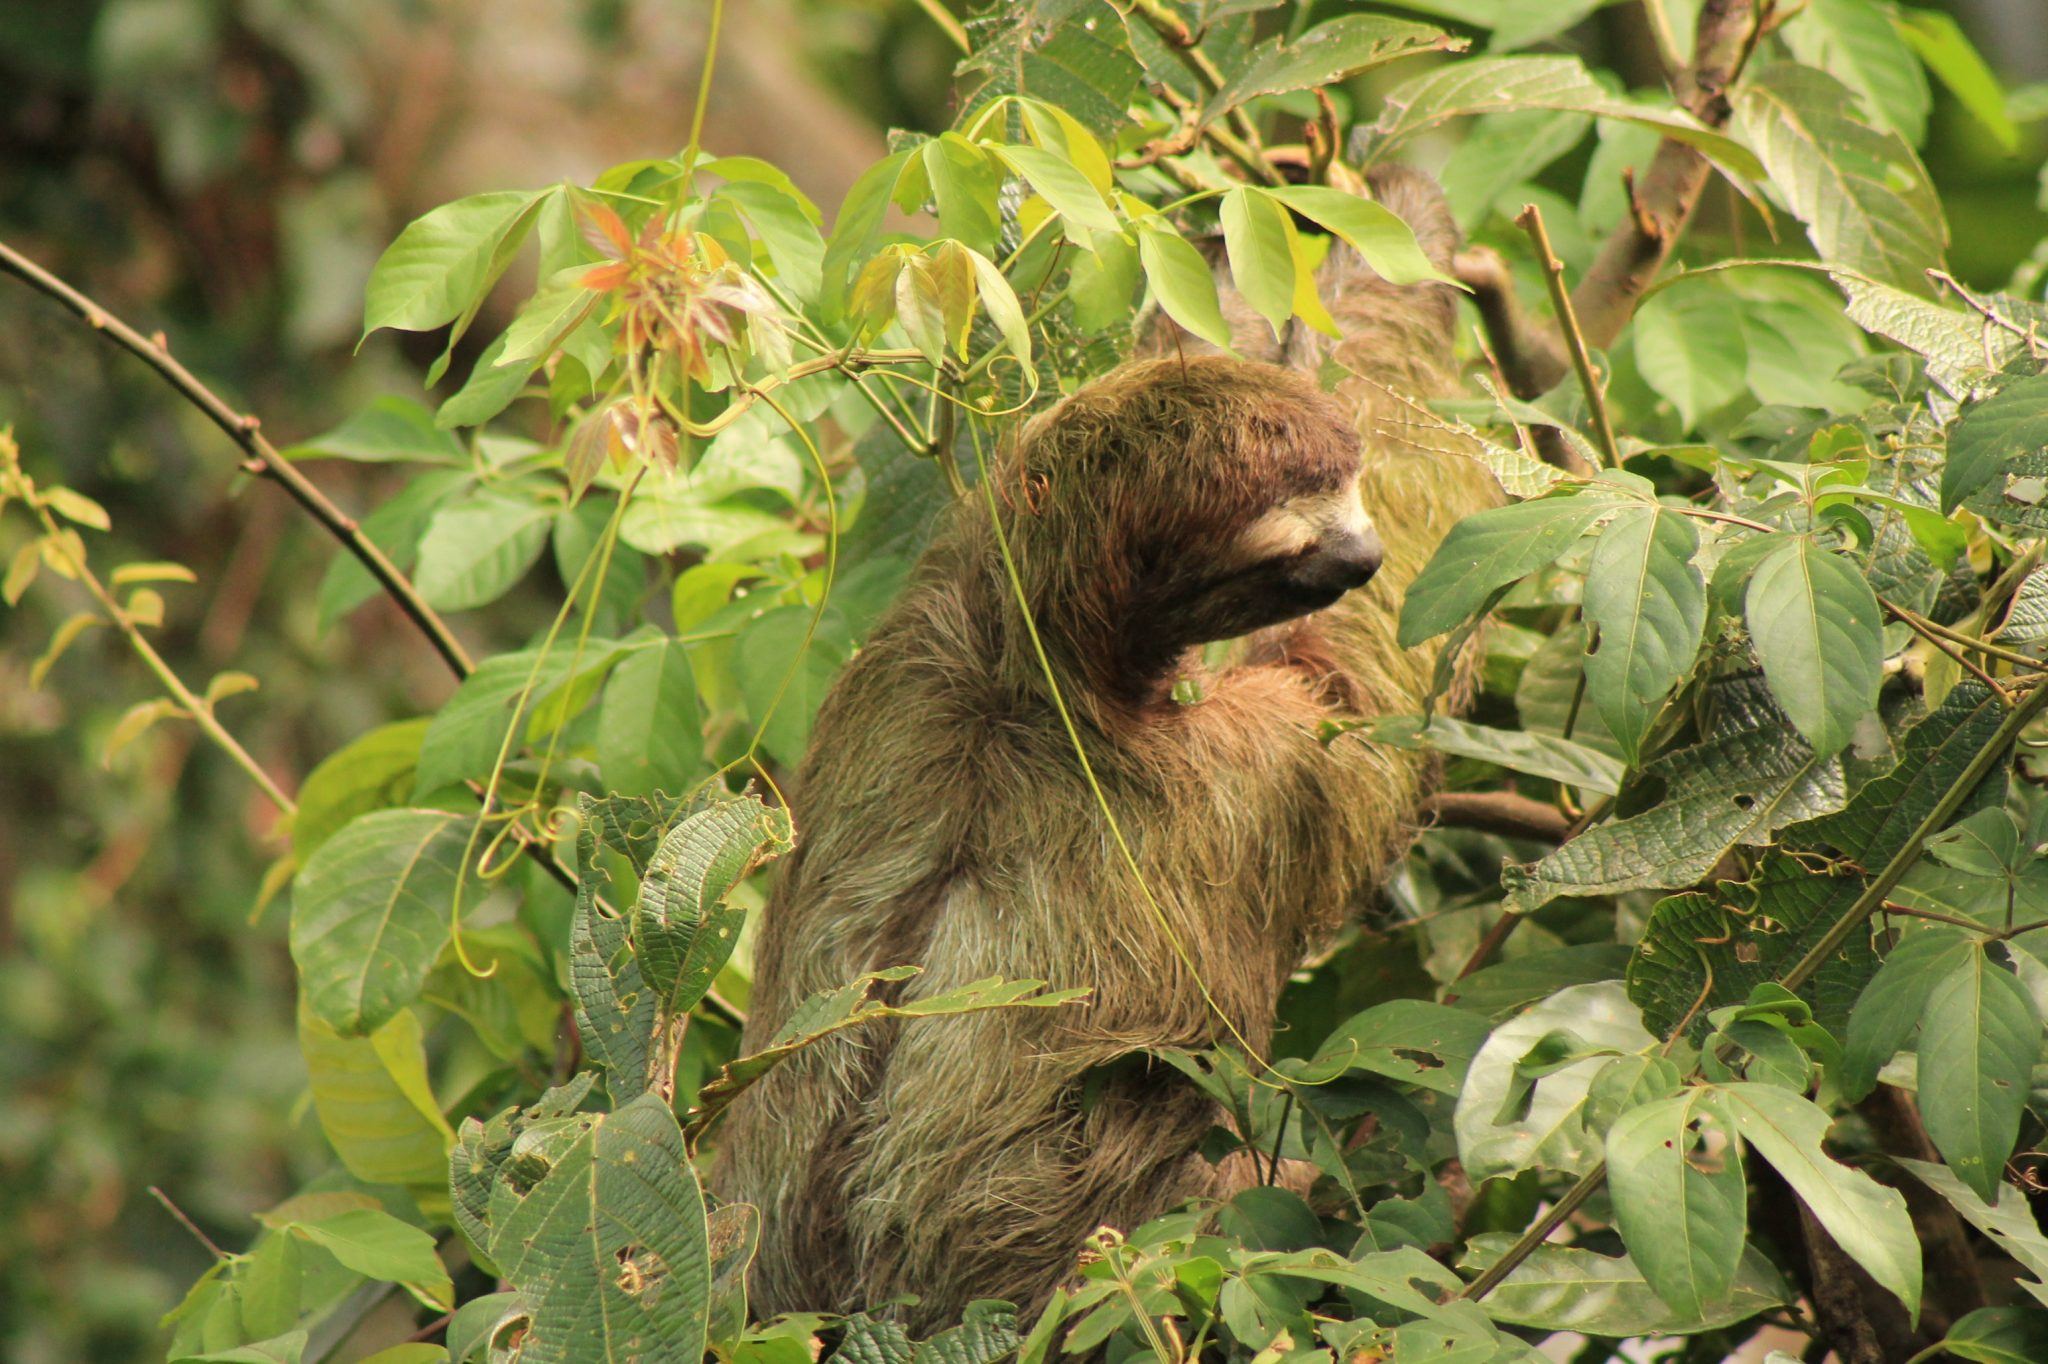 Experience the wild side of Costa Rica on a thrilling wildlife trip in La Fortuna.